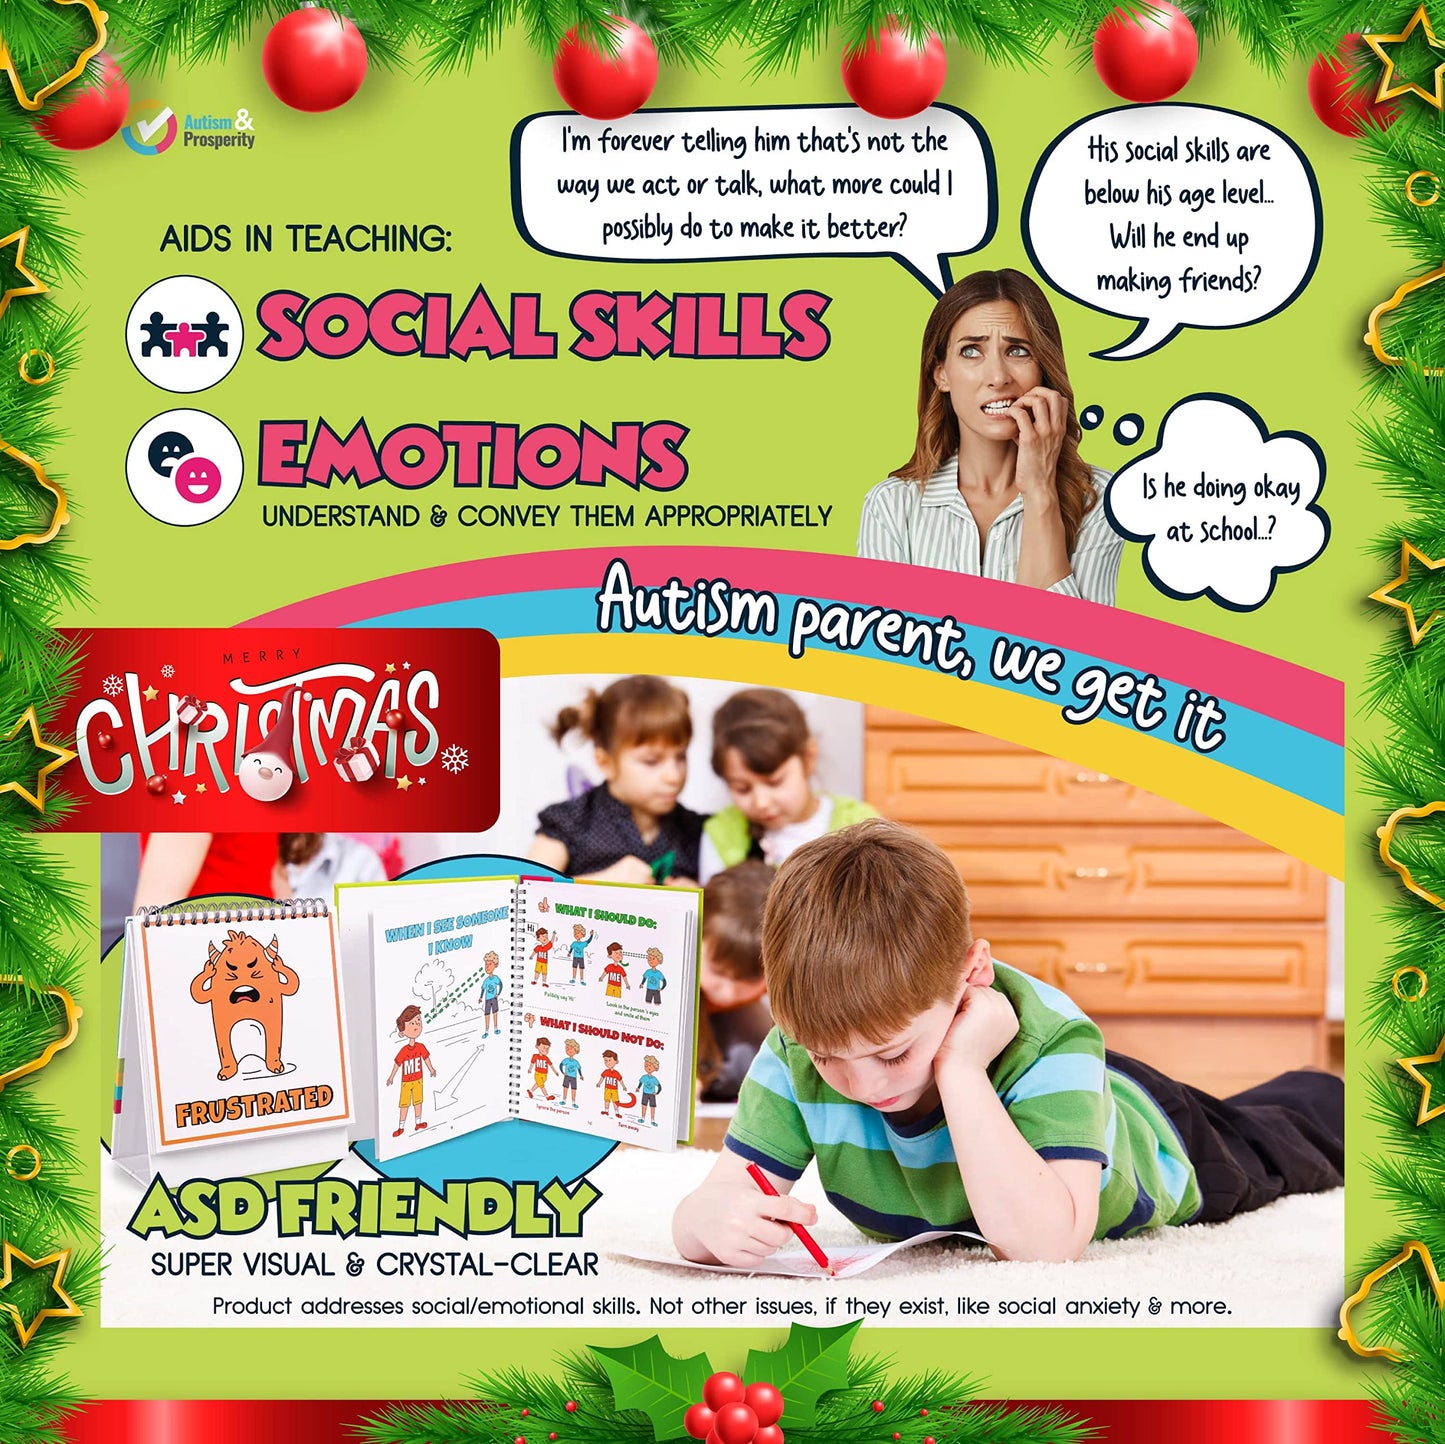 Autism & Prosperity Kids Emotions & Social Life Skills Autistic Children Set ASD Child Boys Girl Teen Learning Materials Toys Game Sensory Special Needs No 1-3 Toddlers Age Gifts 3 4 5-7 8-12 Products